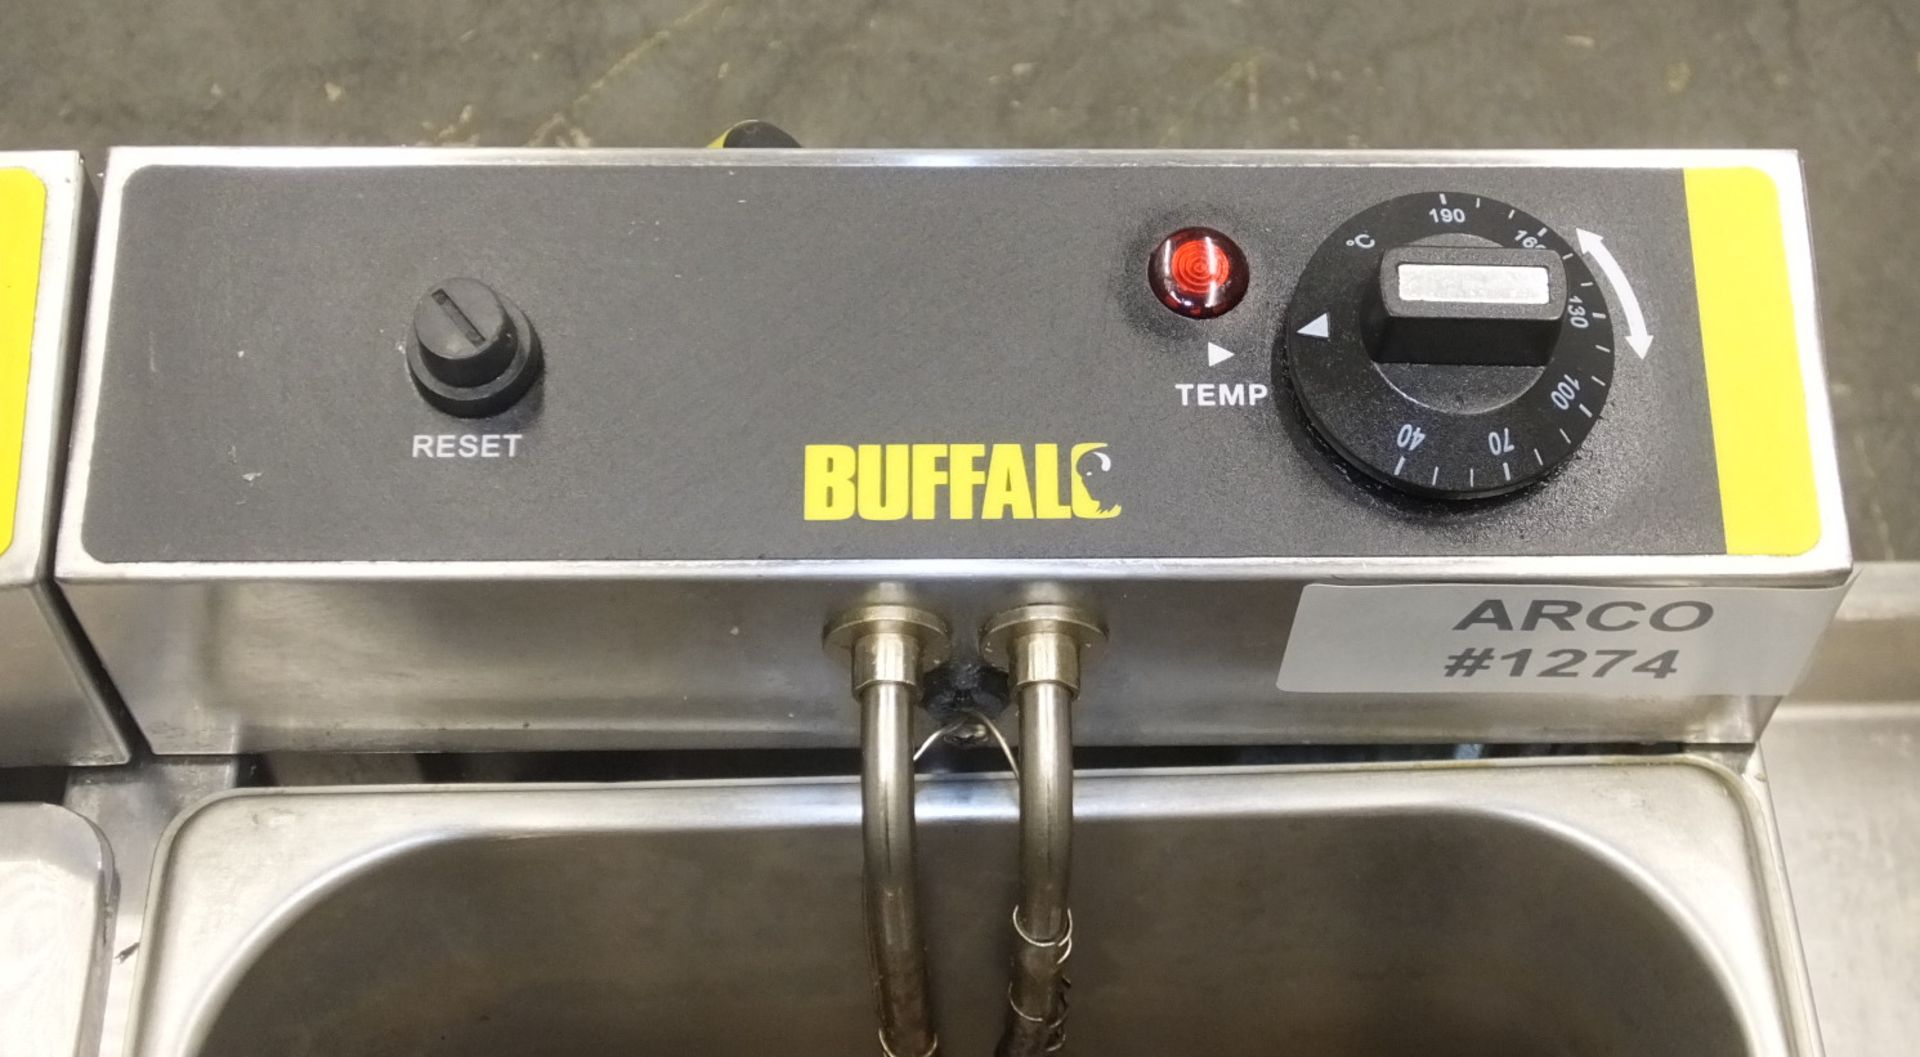 Buffalo L485-03 Double Electric Fryer on Stainless Steel Unit - L850 x D600 x H630mm (dime - Image 6 of 8